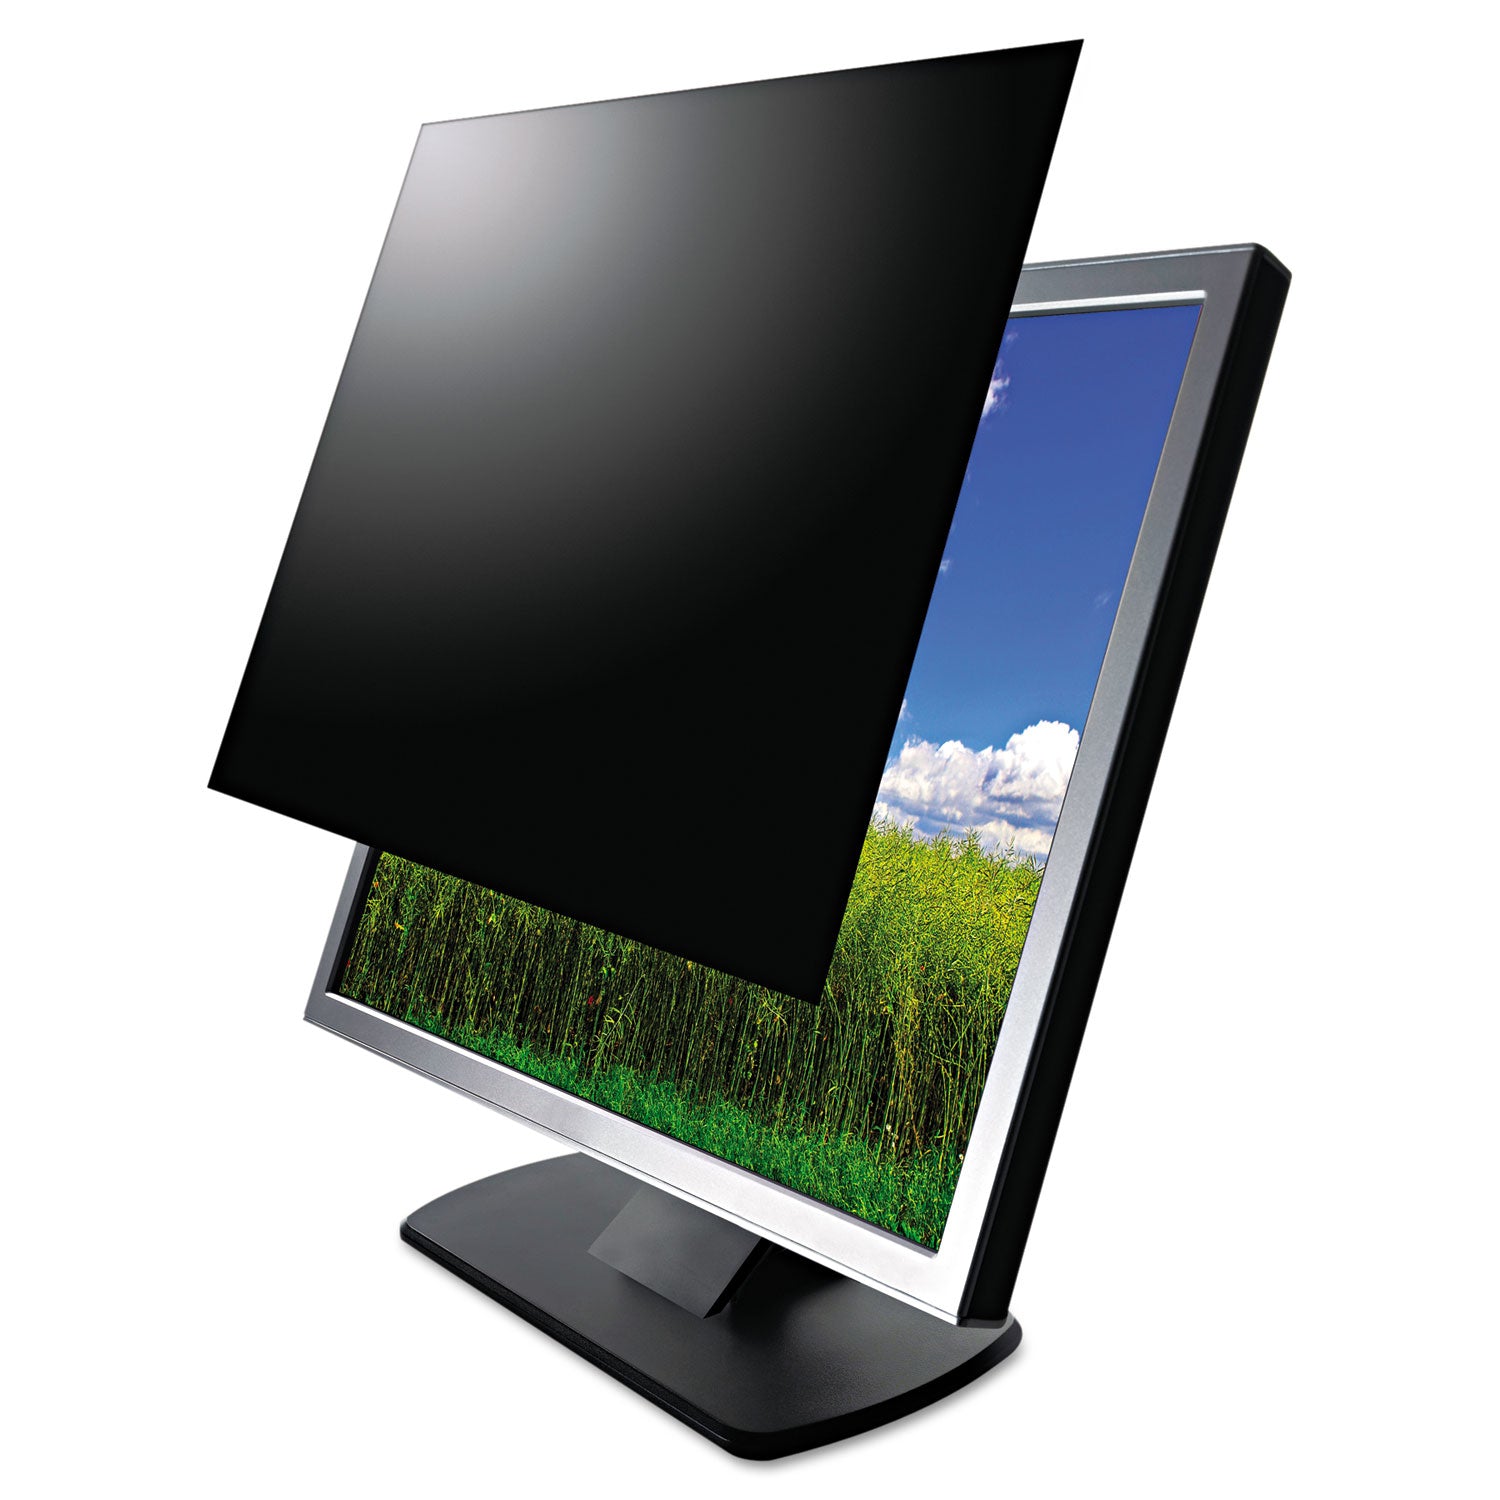 Secure View LCD Privacy Filter for 22" Widescreen Flat Panel Monitor, 16:10 Aspect Ratio - 